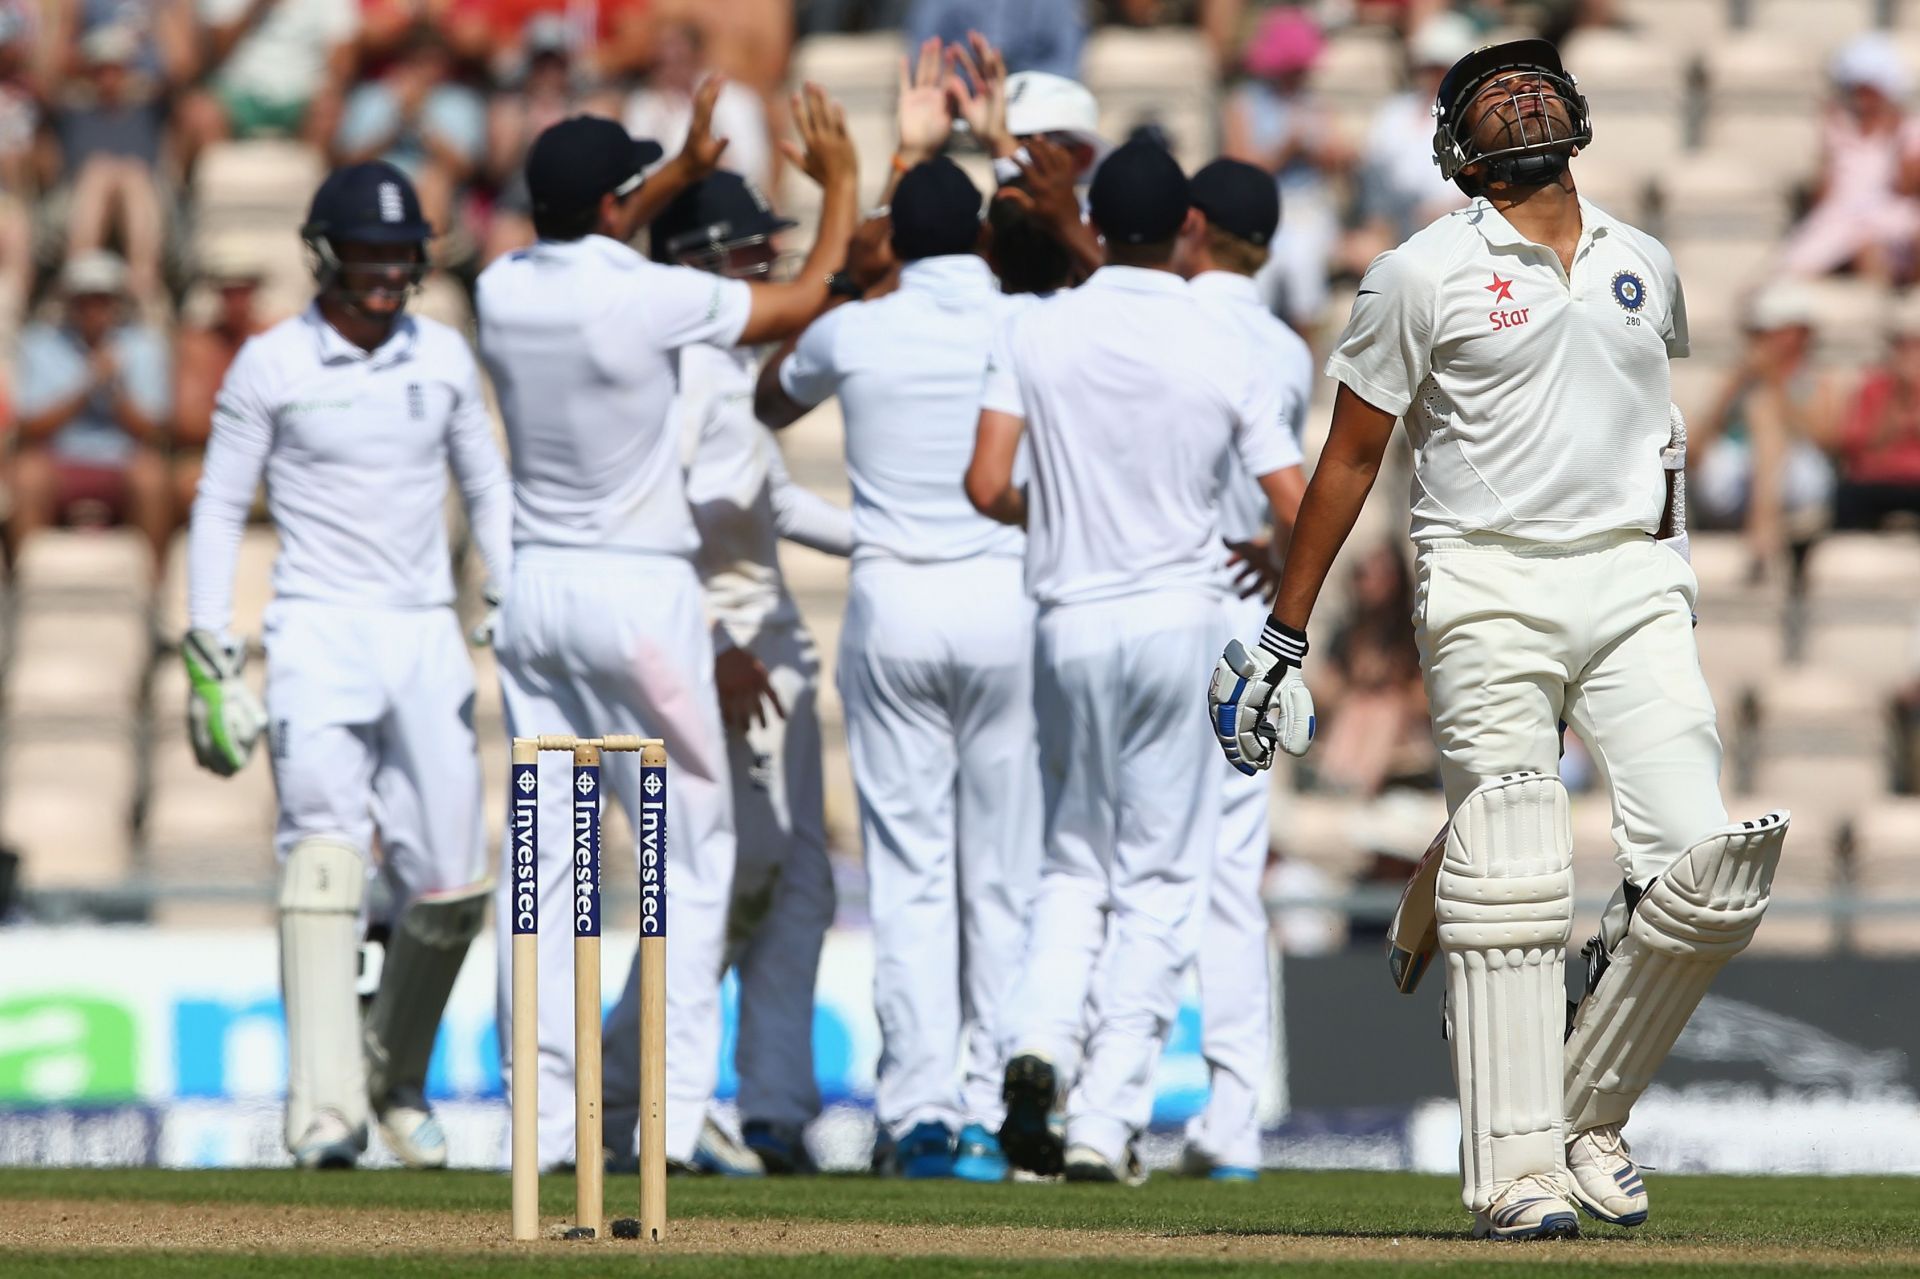 Rohit Sharma (R) was understandably dejected after throwing it away against England in Southampton in 2014.